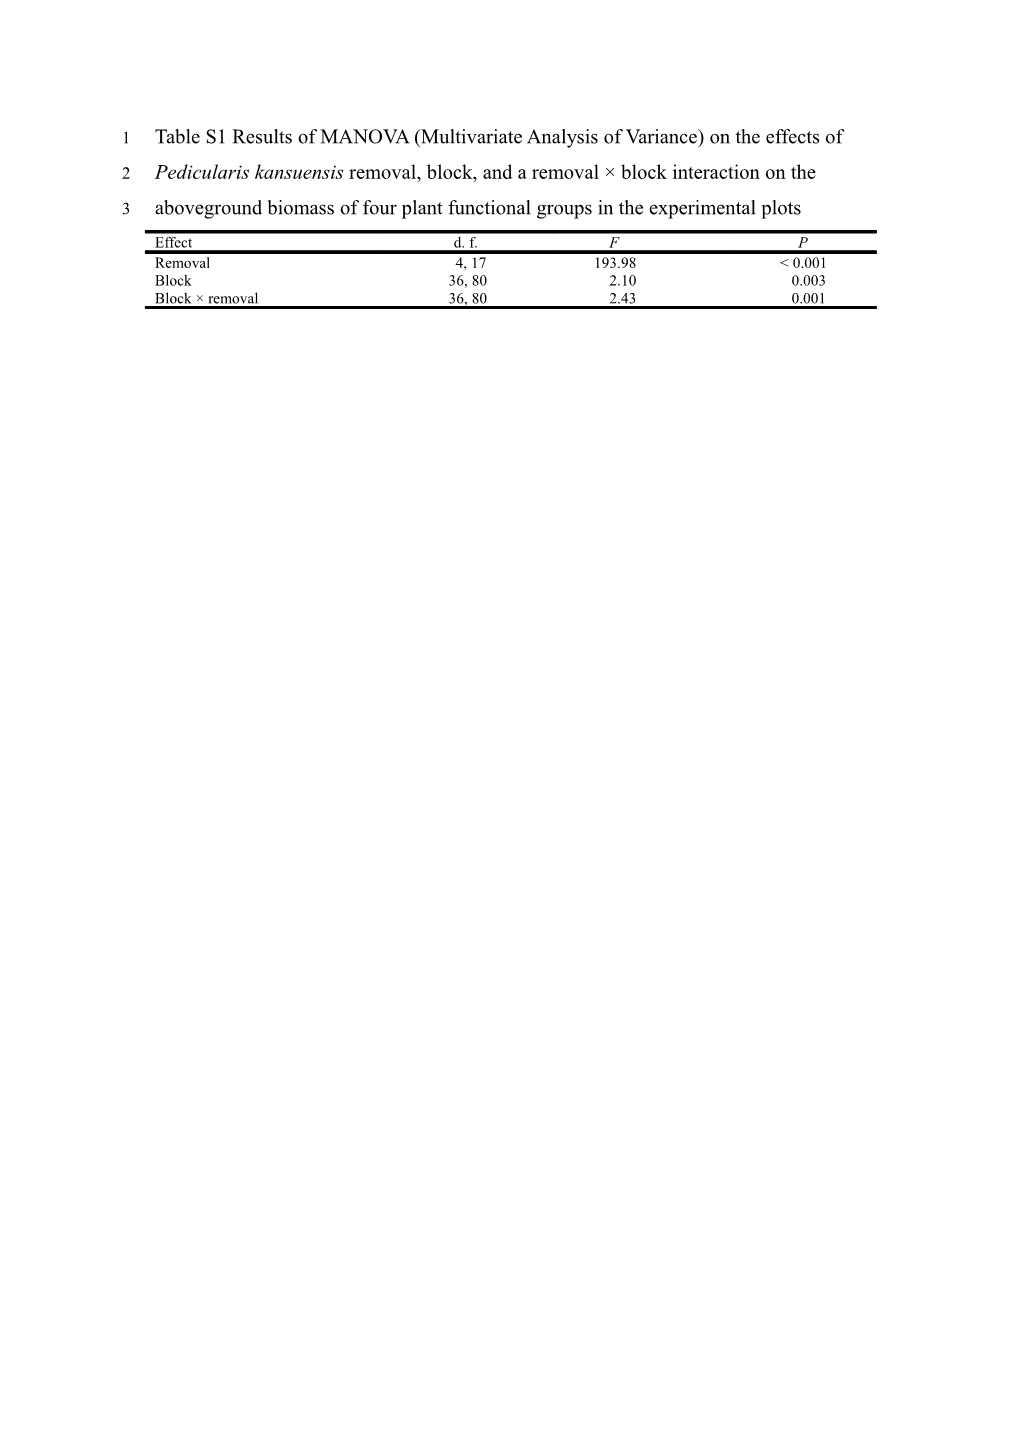 Table S1 Results of MANOVA(Multivariate Analysis of Variance) on the Effects Of